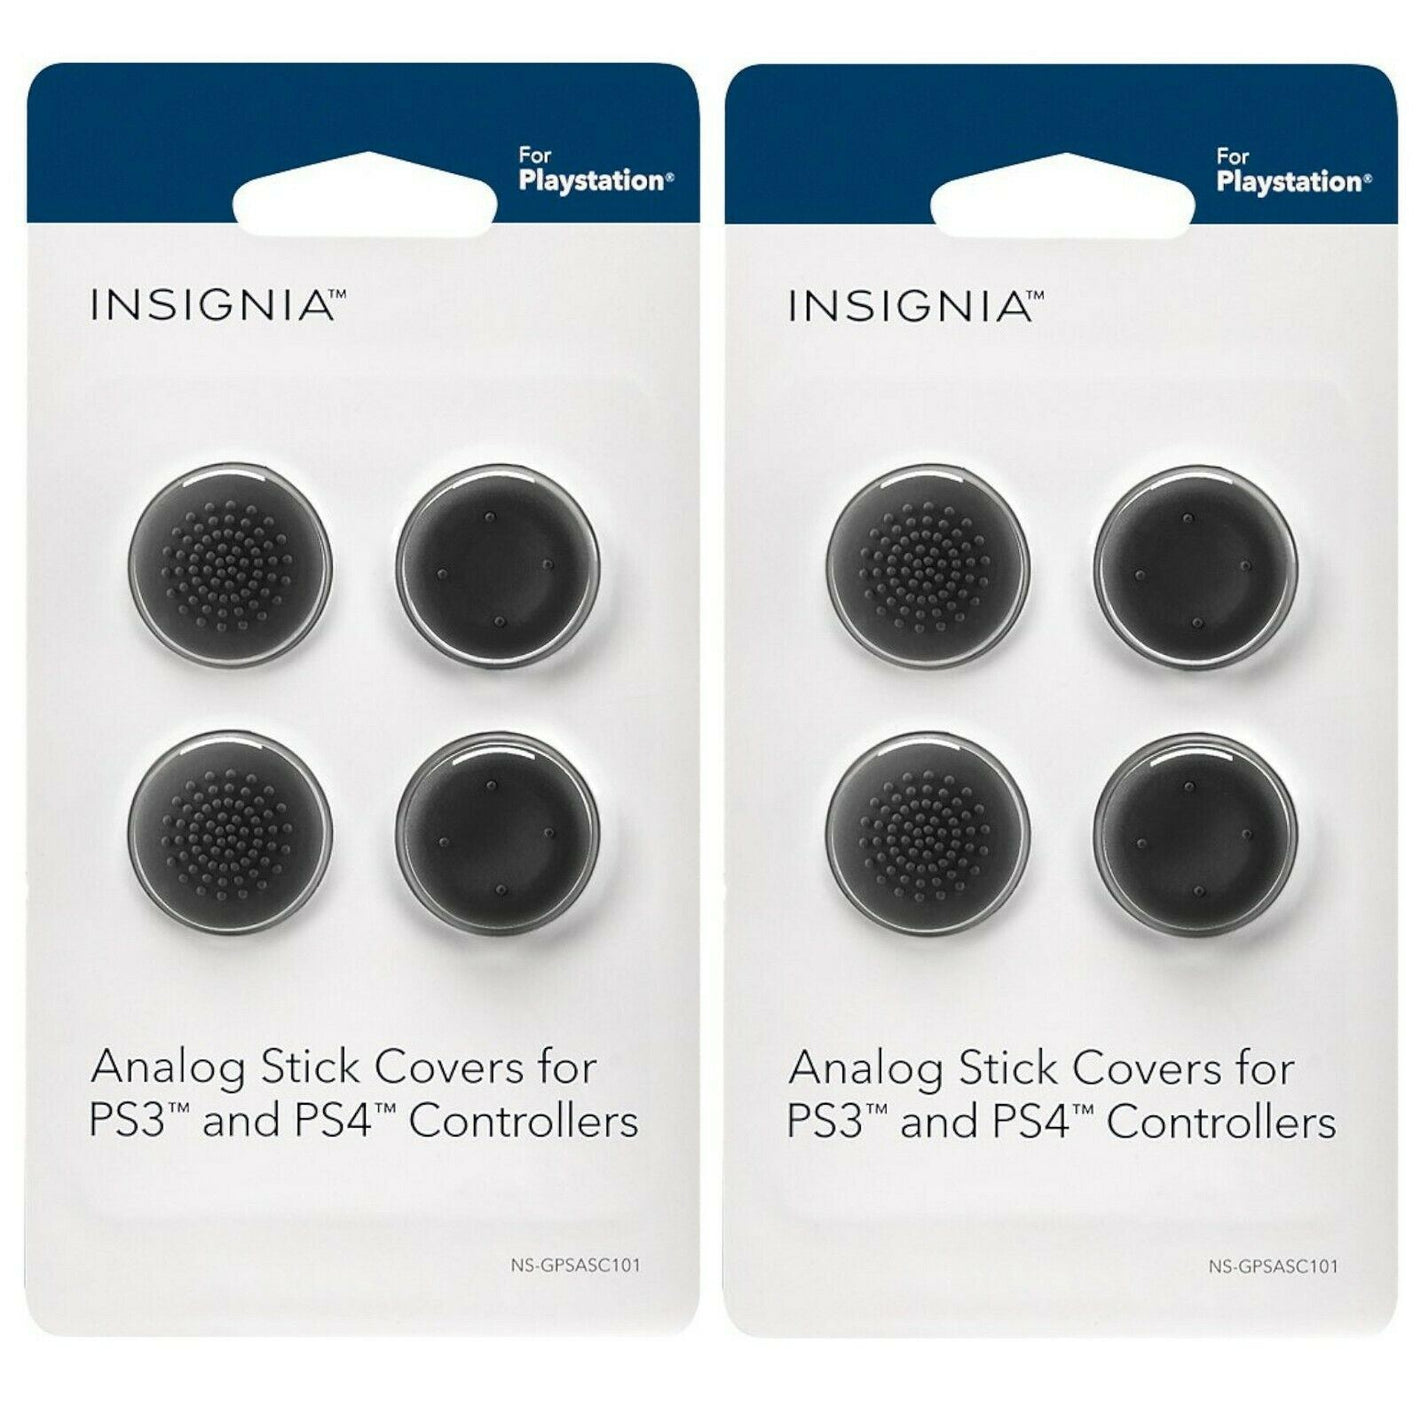 NEW 2-PK Insignia Analog Stick Covers for PlayStation 4 PlayStation 3 Black PS4